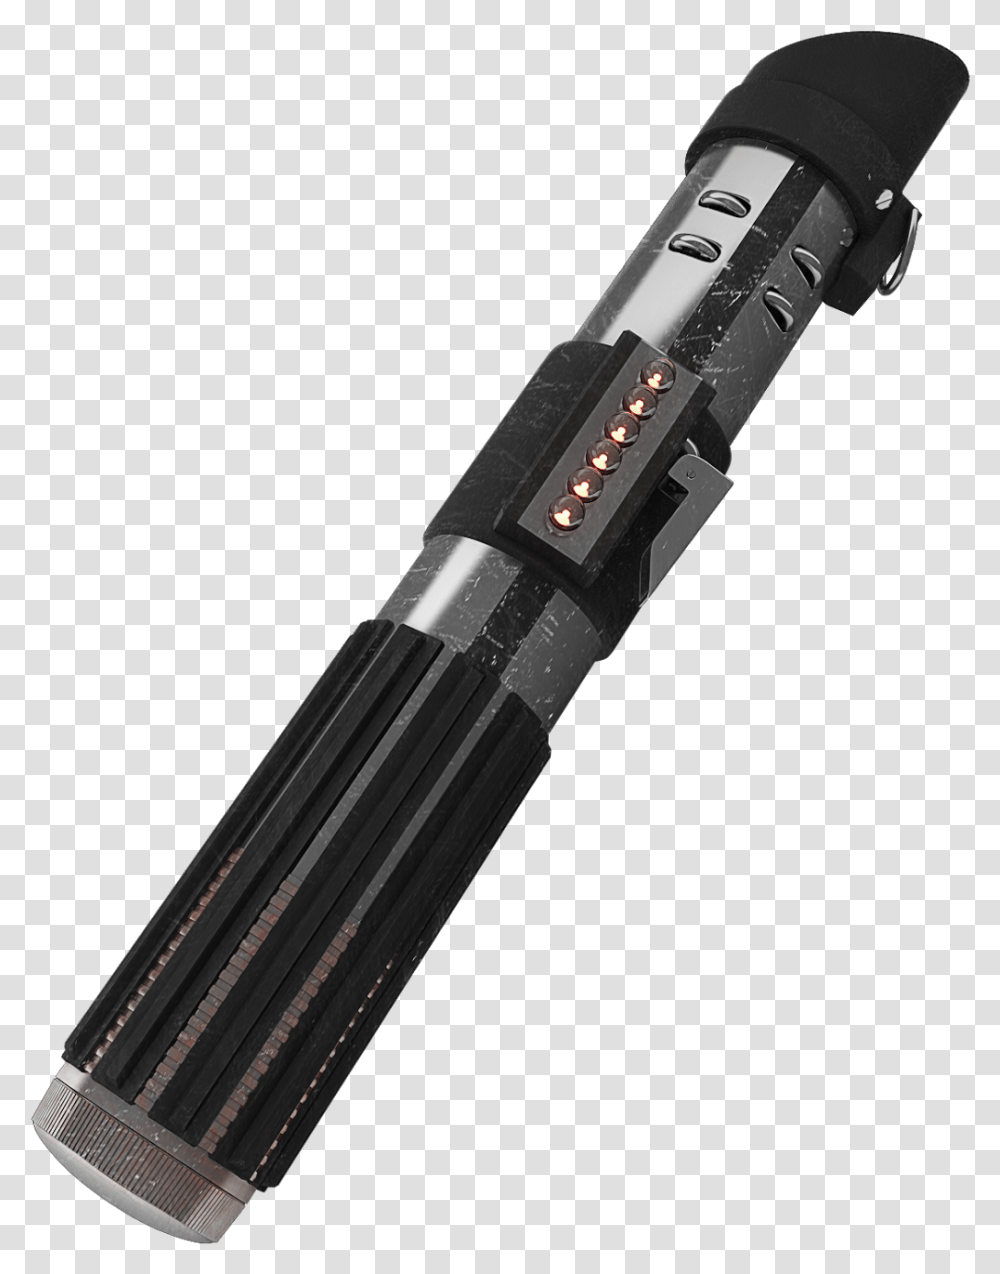 Thumb Image Star Wars Lightsaber Handle, Lamp, Weapon, Weaponry, Flashlight Transparent Png